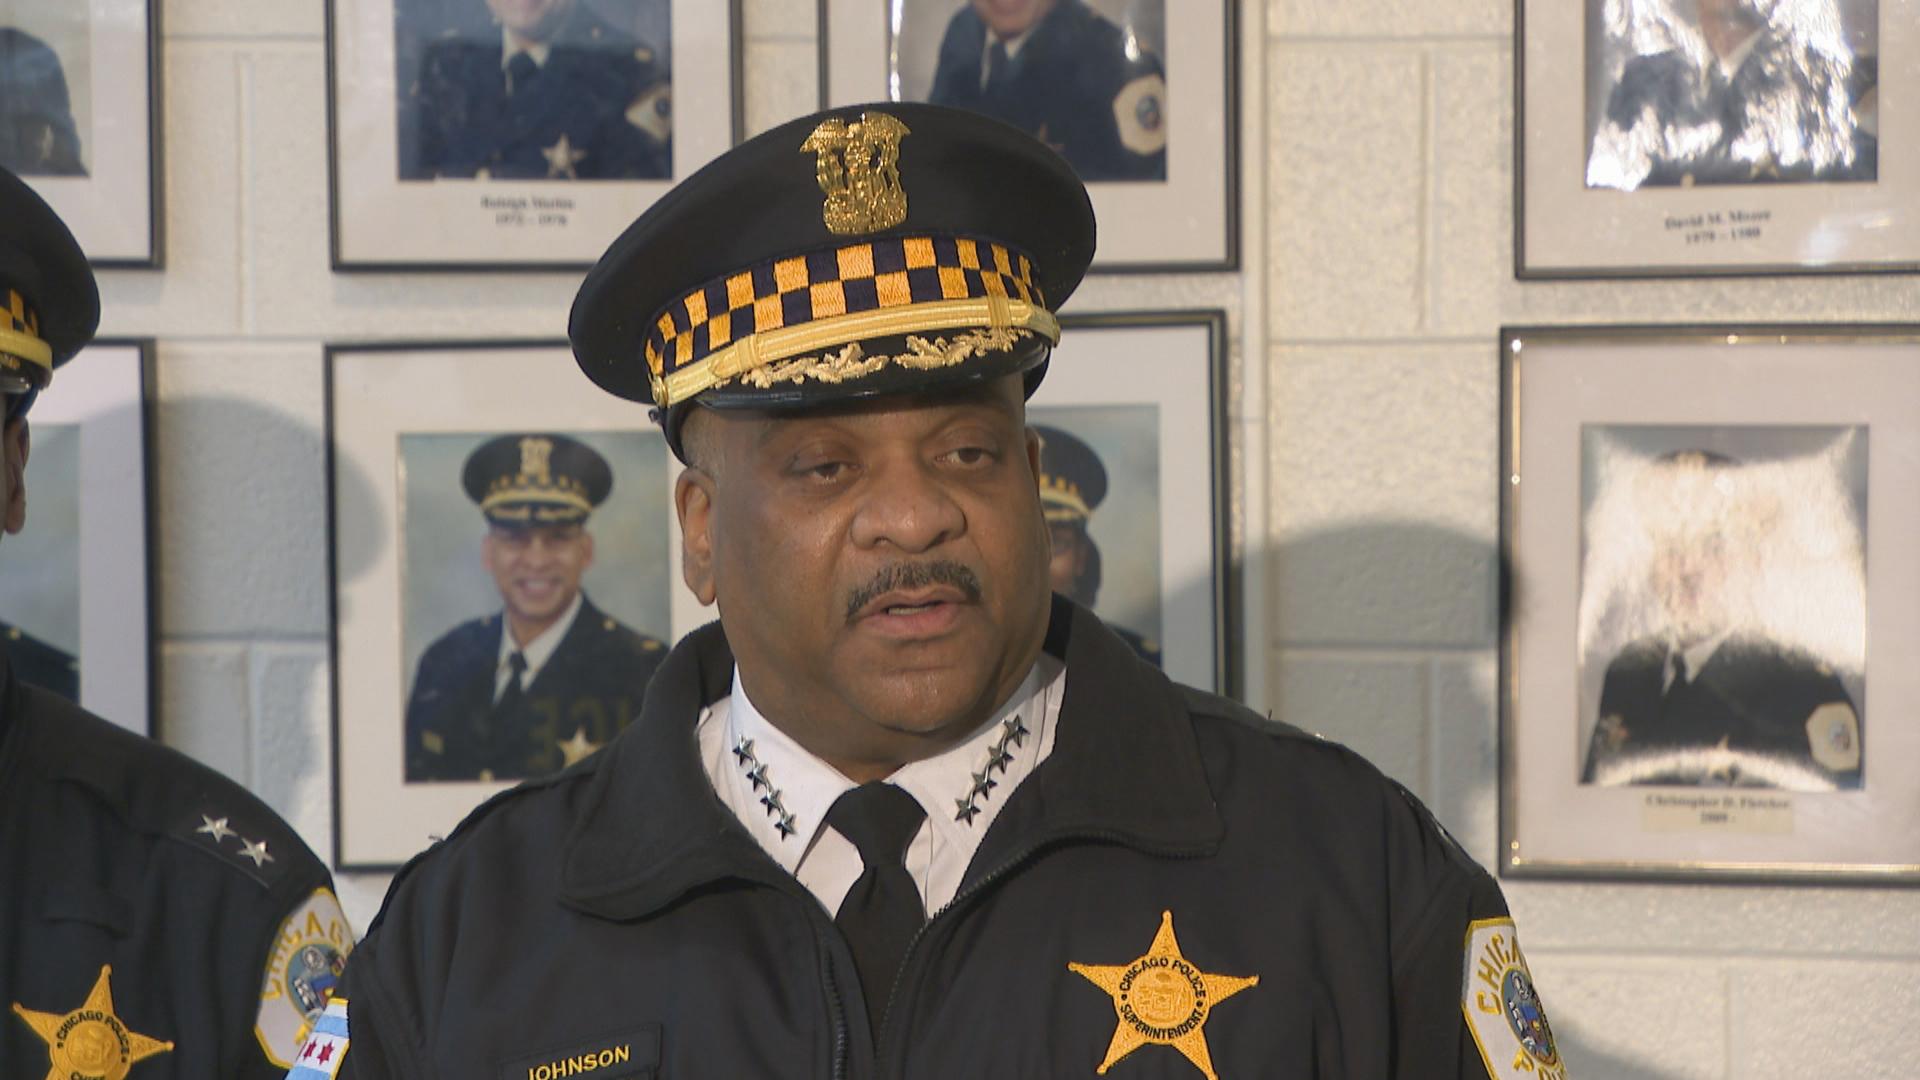 Chicago Police Department Superintendent Eddie Johnson speaks to the press on Monday, April 2, 2018. (Chicago Tonight)